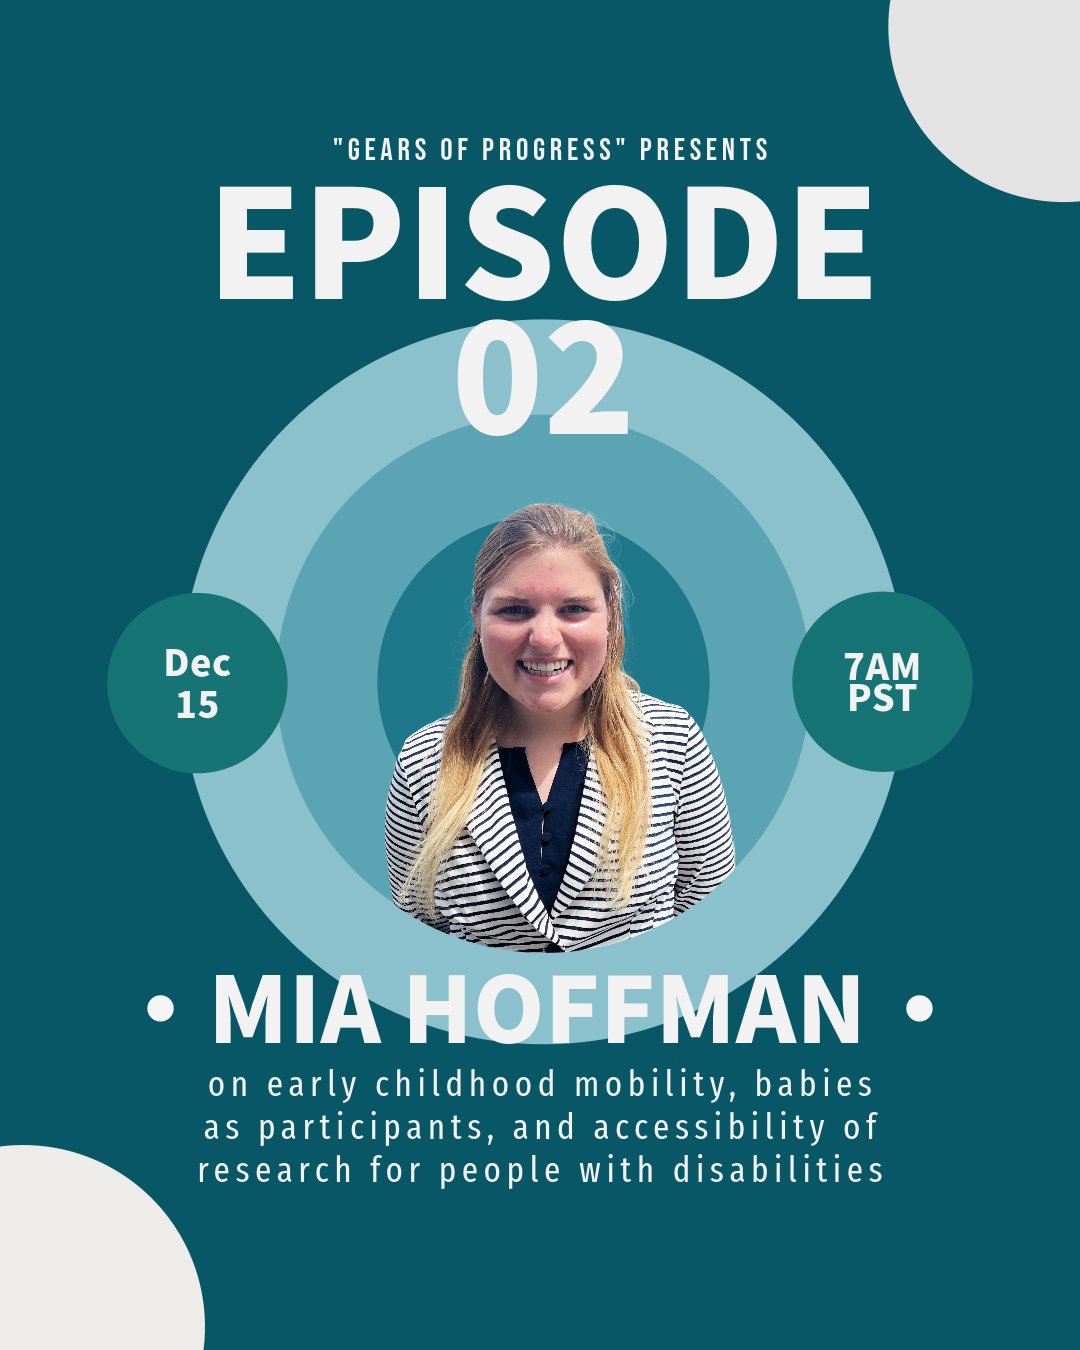 Mia wearing a blazer imposed on a background that says Episode 2 Mia Hoffman on early childhood mobility, young kids as participants, and accessibility of research for people with disabilities.